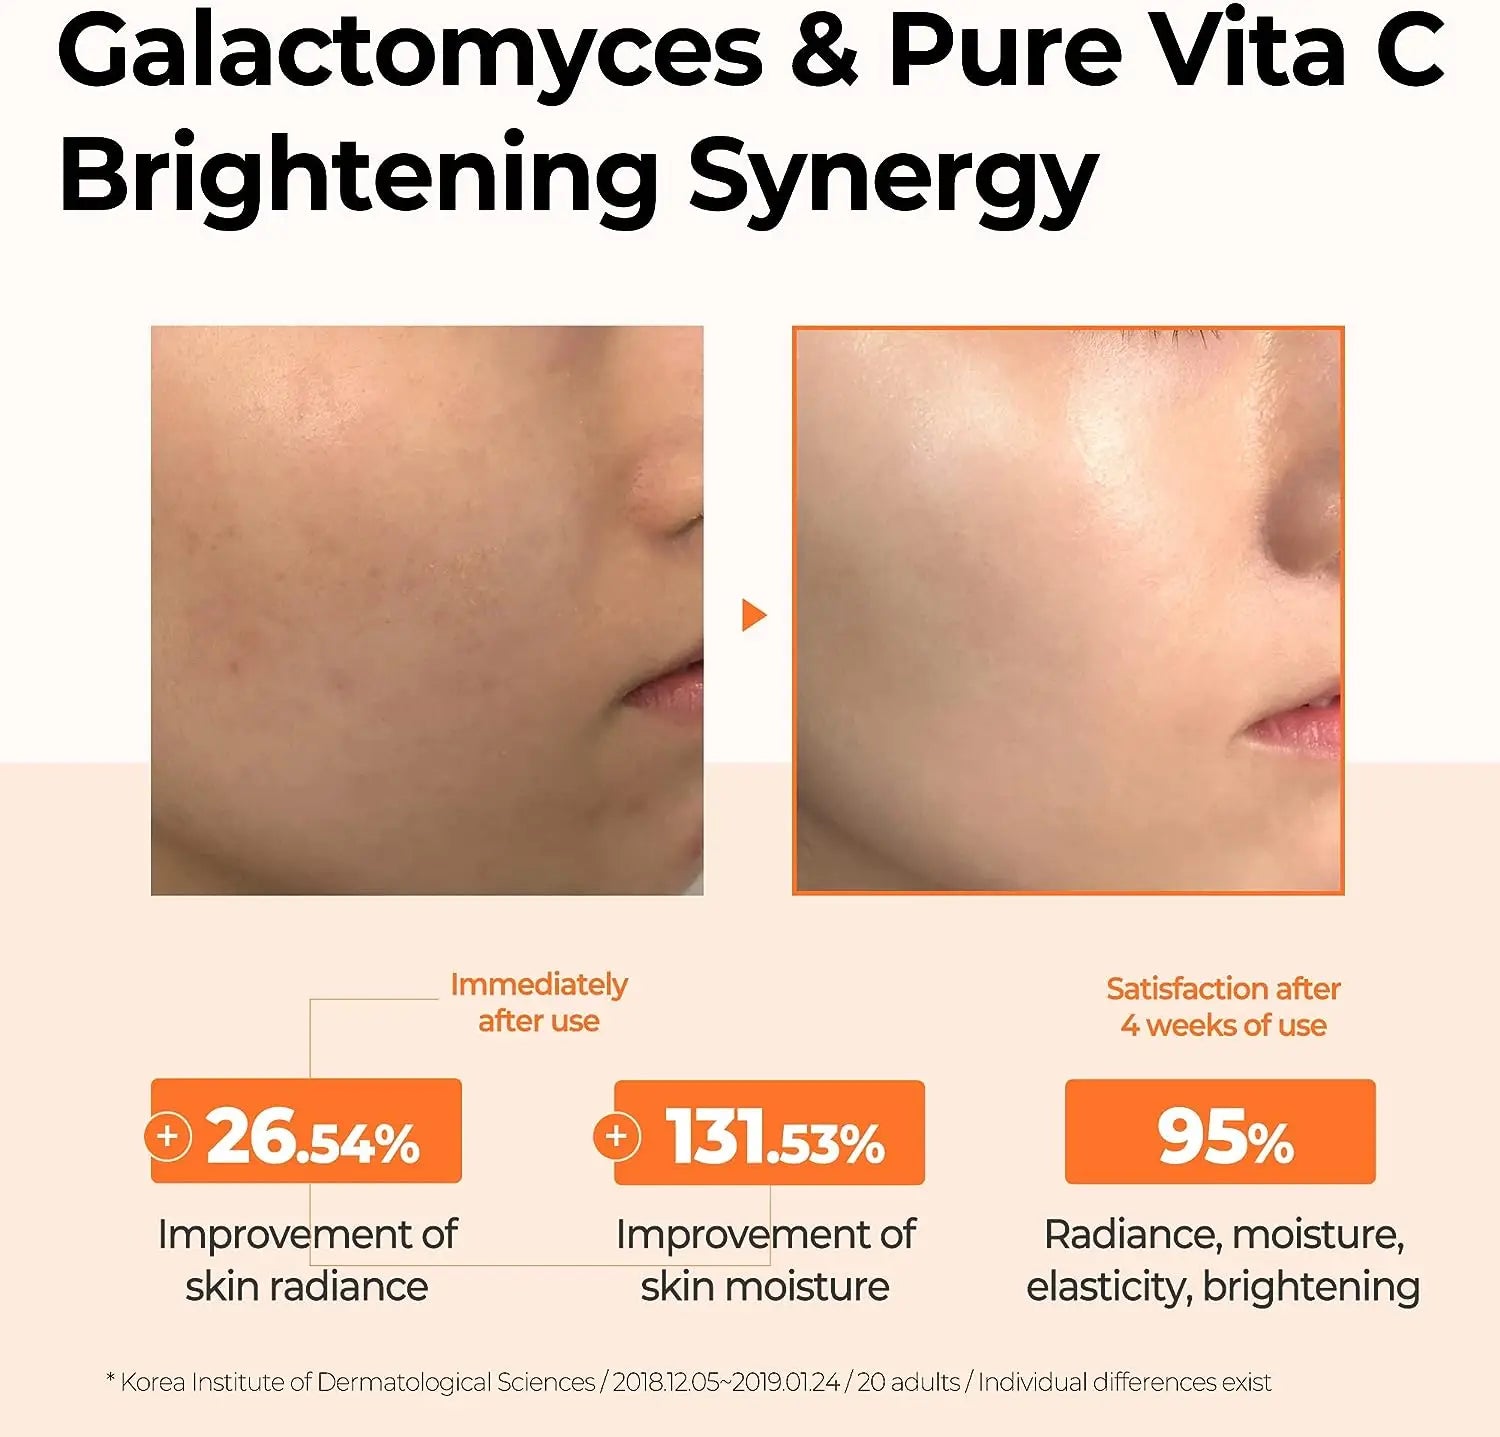 Toner with vitamin C and galactomycetes by Some By Mi (Some By Mi Galactomyces Pure Vitamin C Glow Toner)